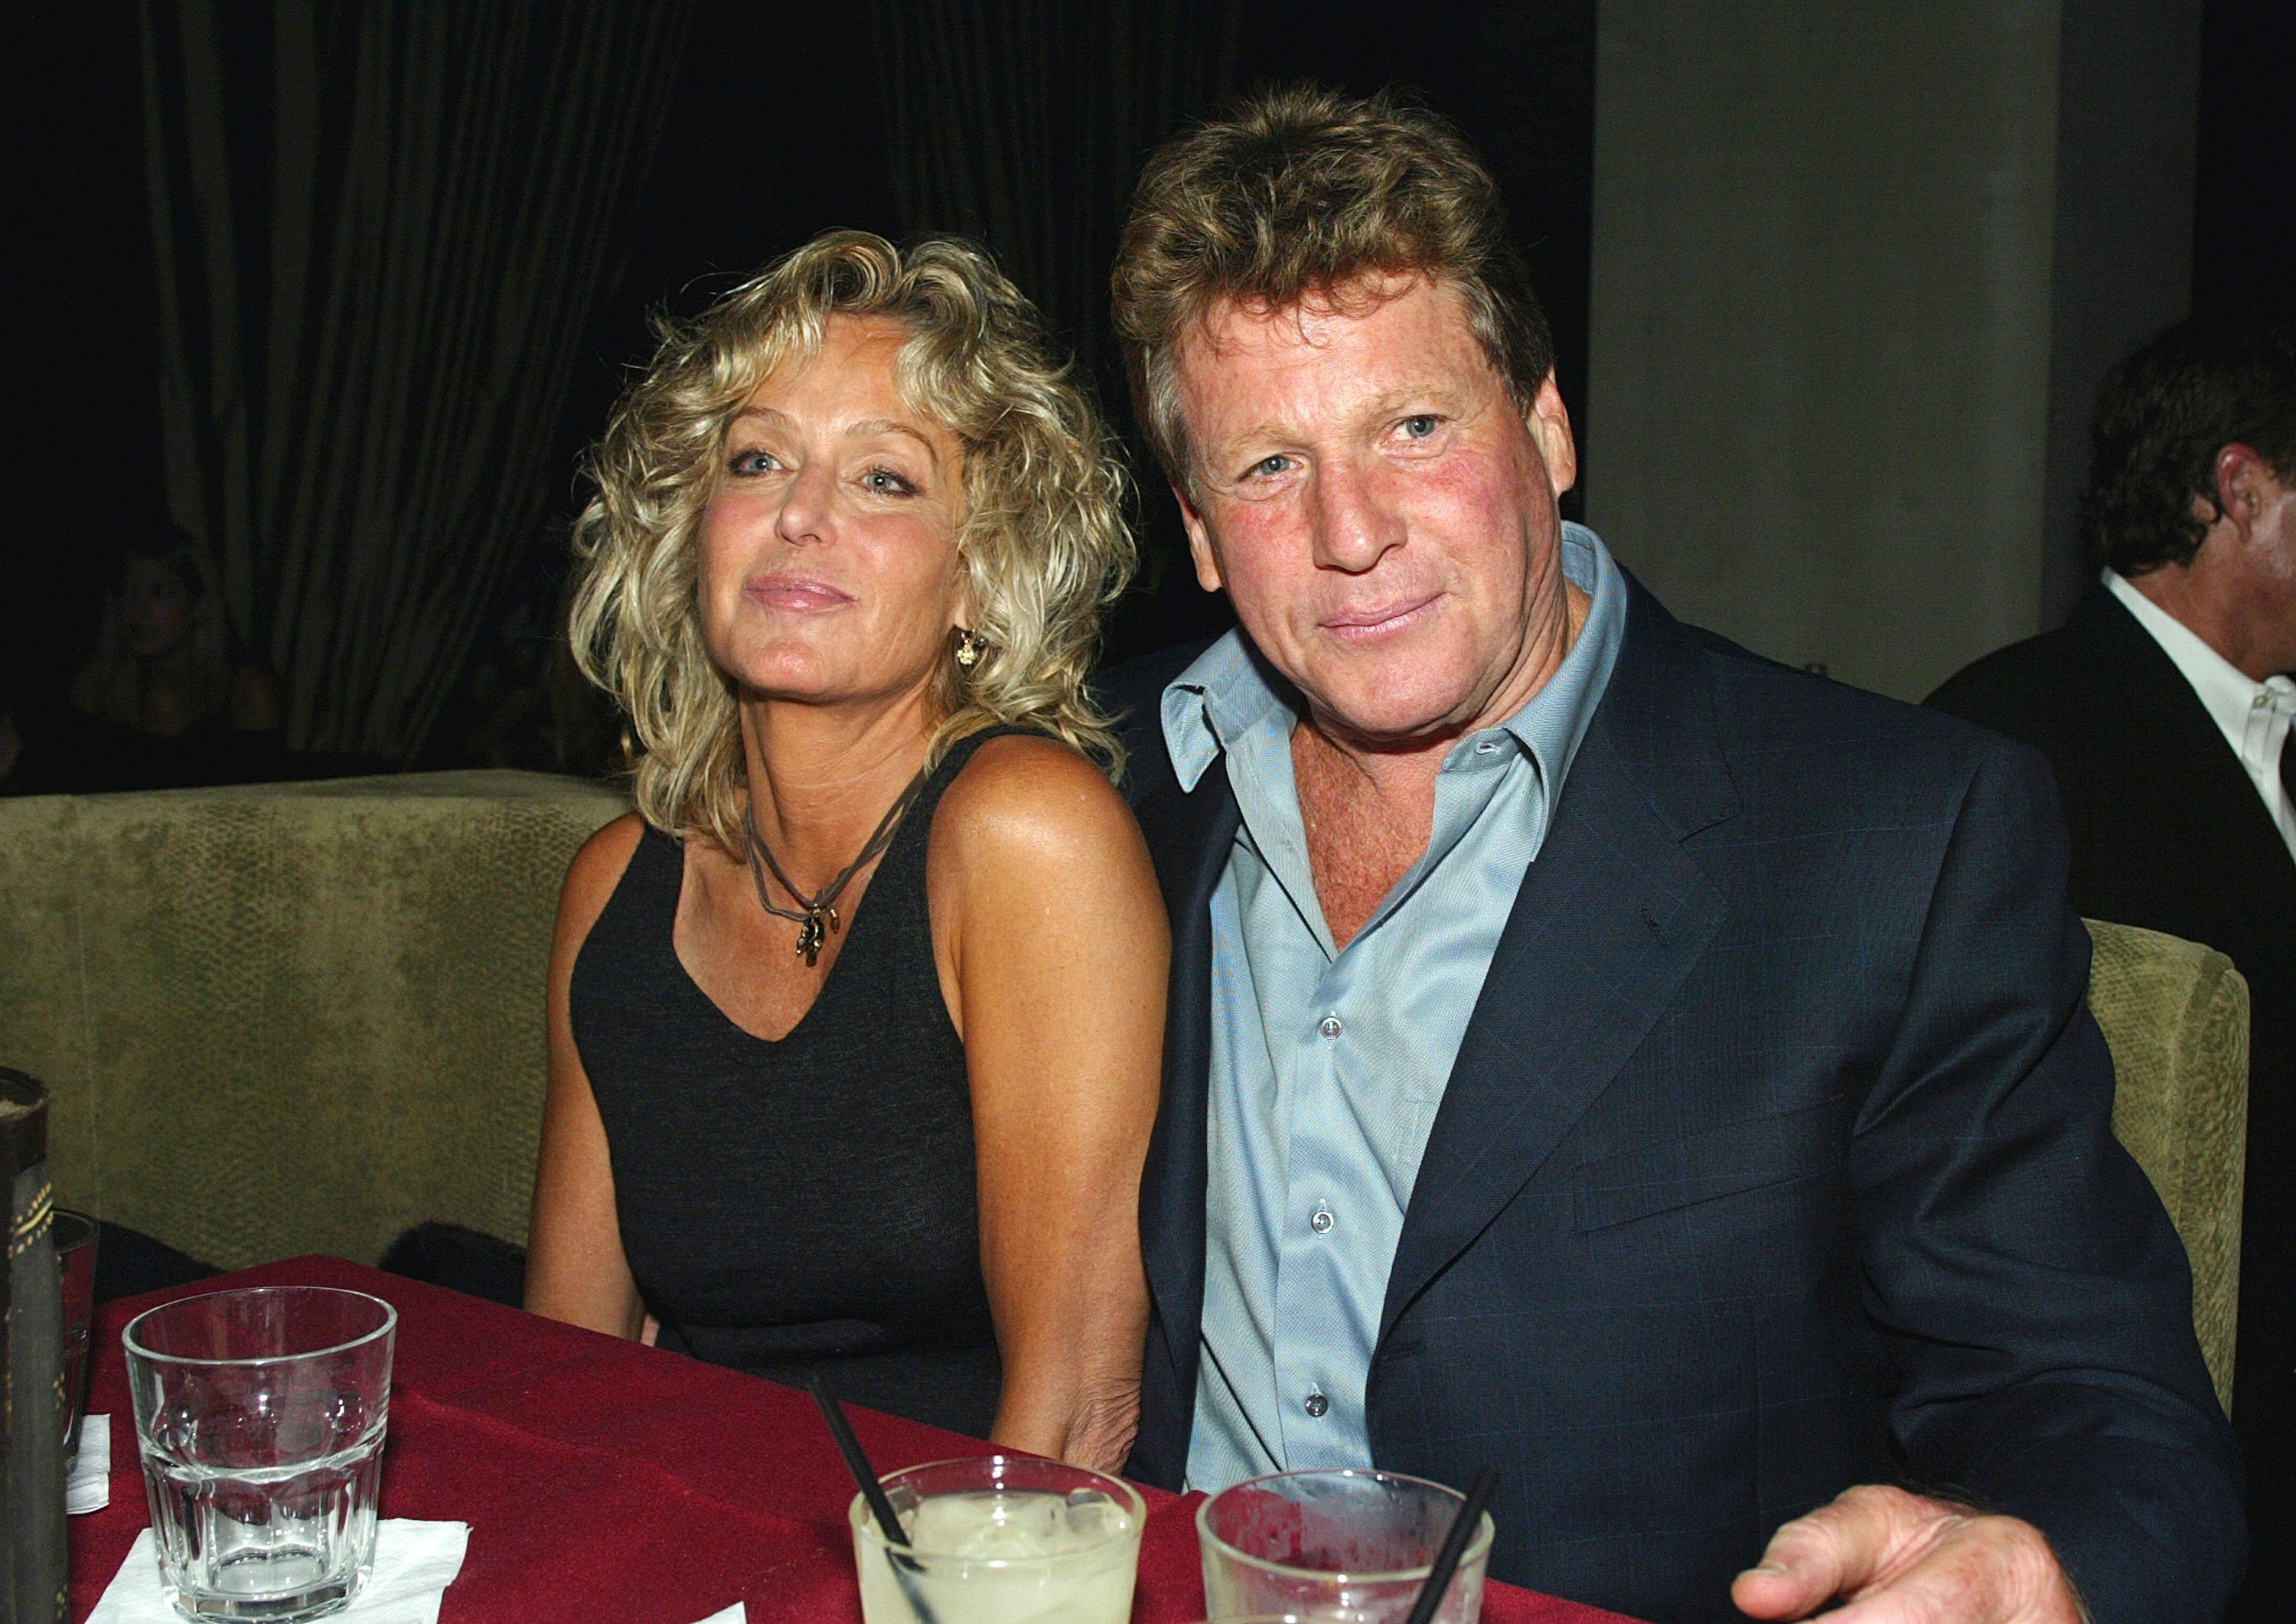 Farrah Fawcett and Ryan O'Neal at the Highlands on April 10, 2003 in Los Angeles, California. | Photo: Getty Images